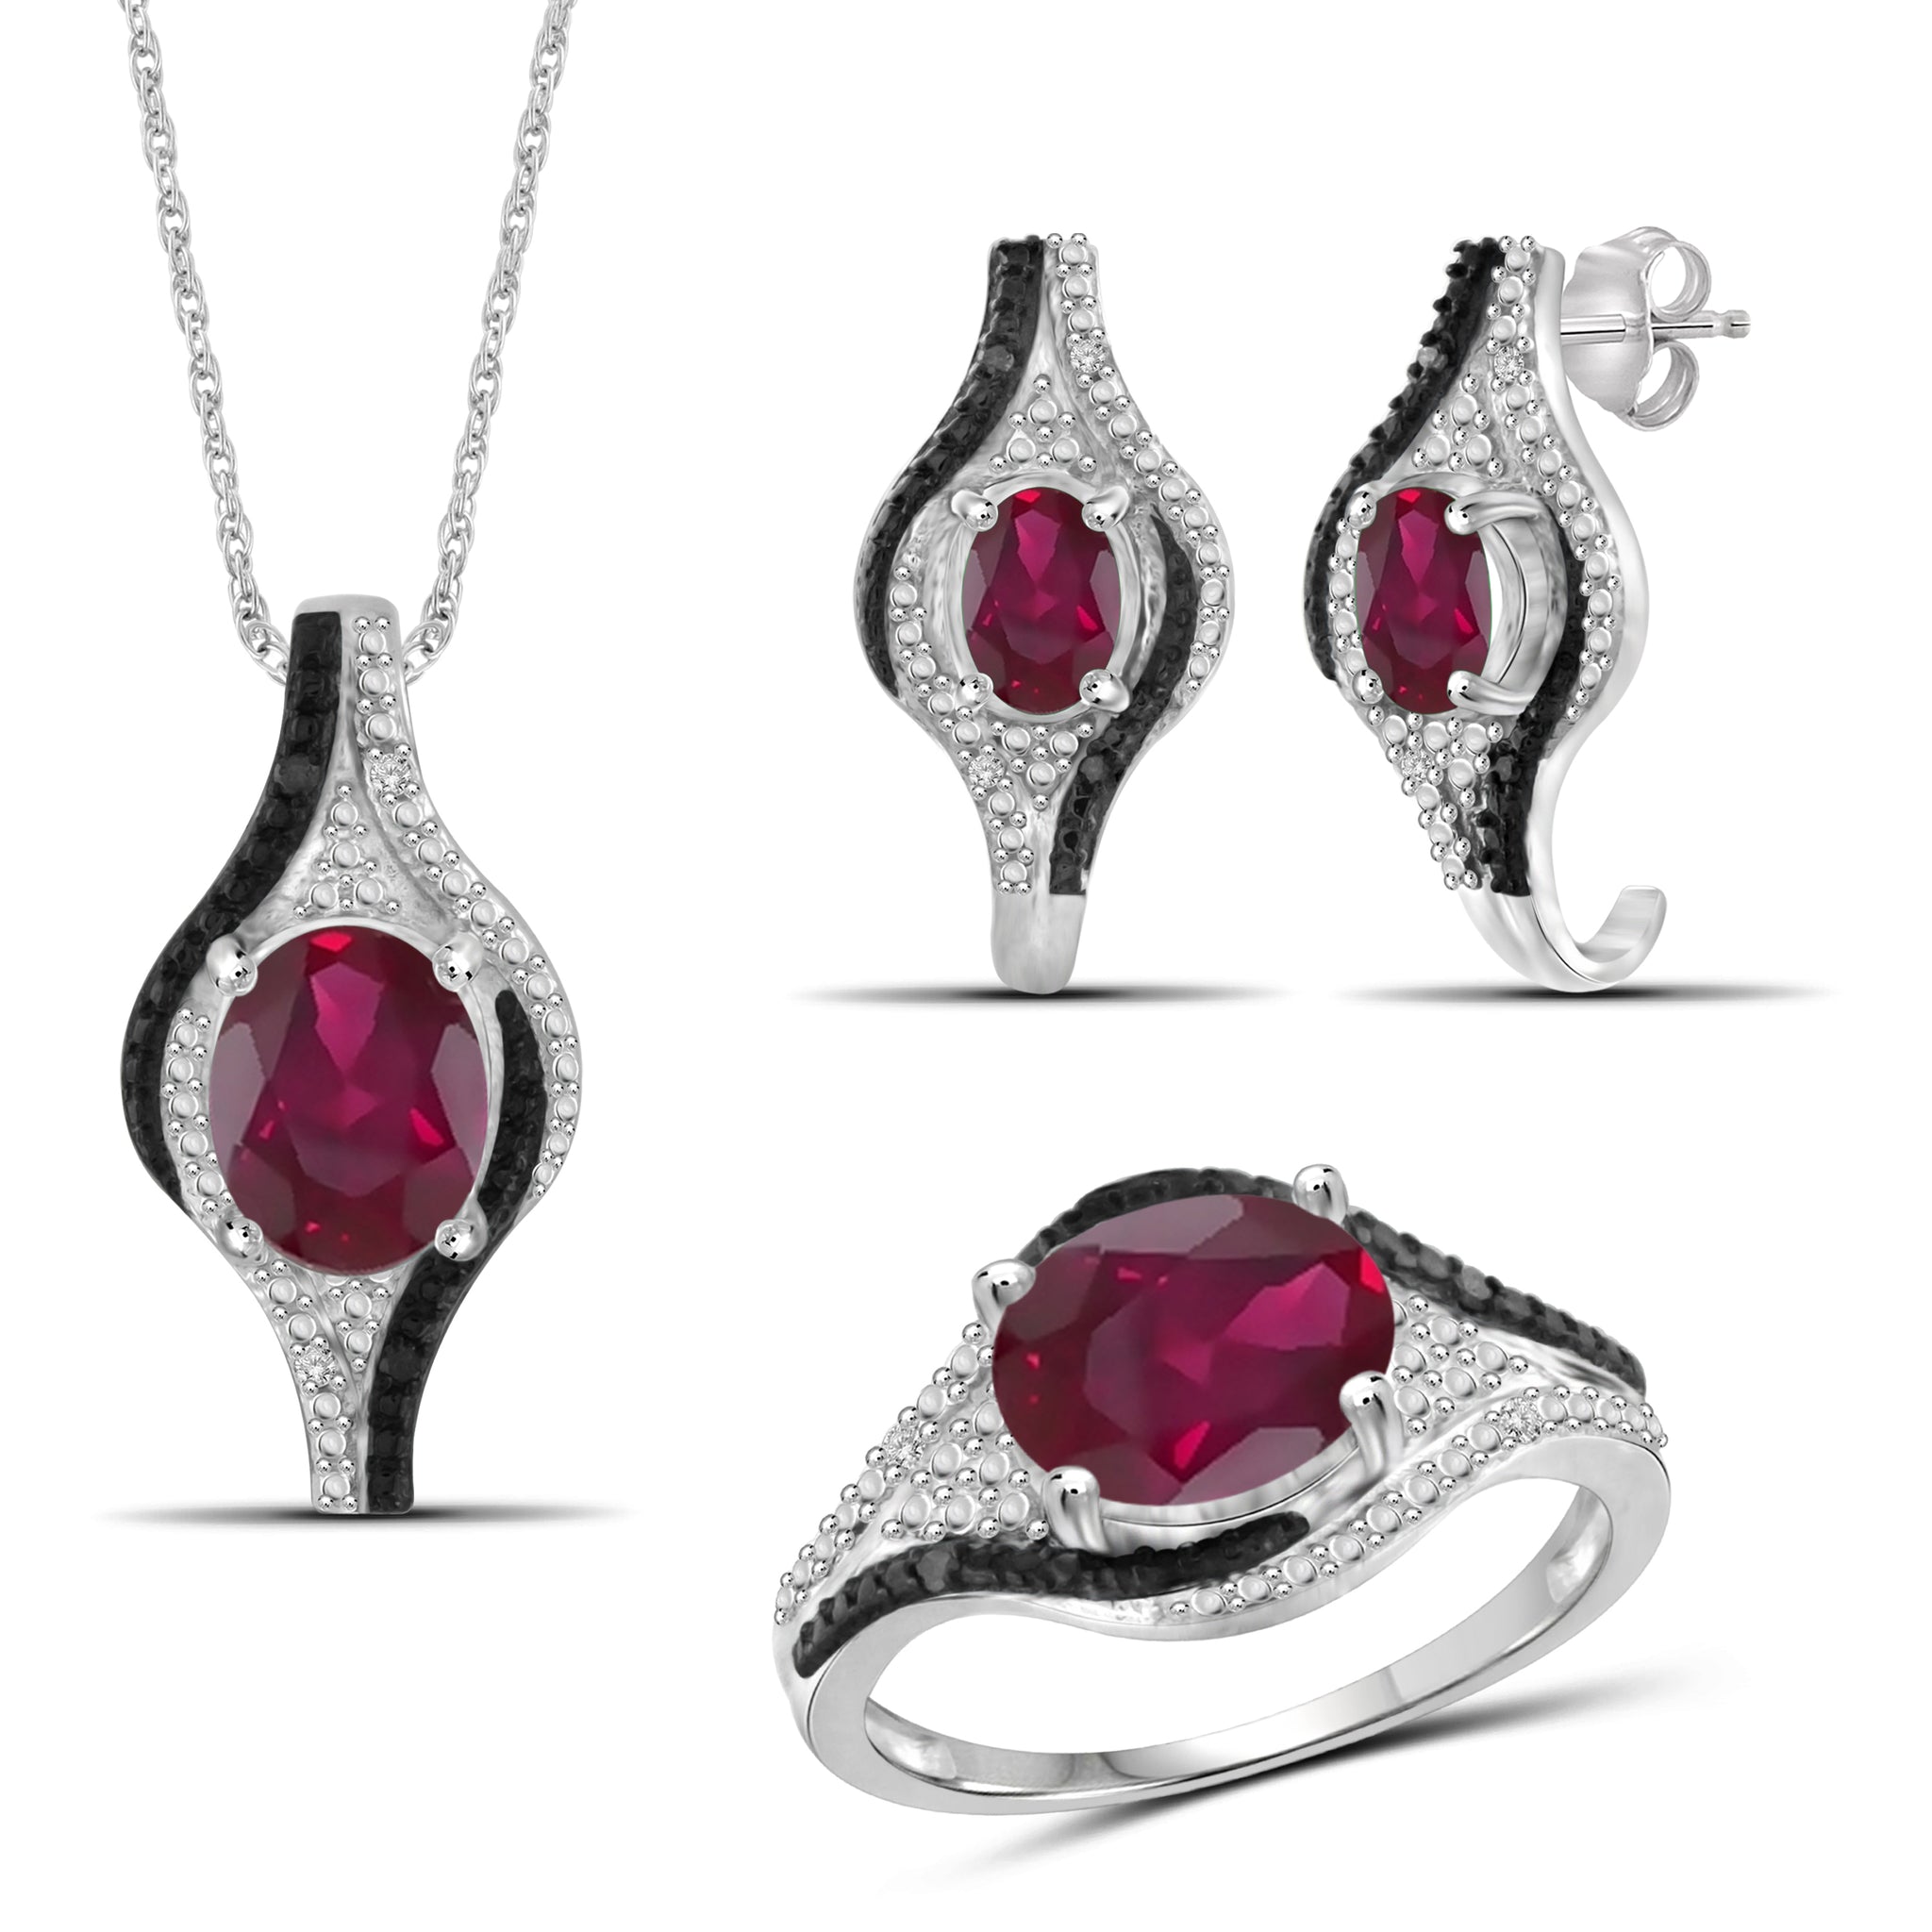 JewelonFire 5.90 Carat T.G.W. Ruby And 1/10 Carat T.W. Black & White Diamond Sterling Silver 3 Piece Jewelry Set - Assorted Colors